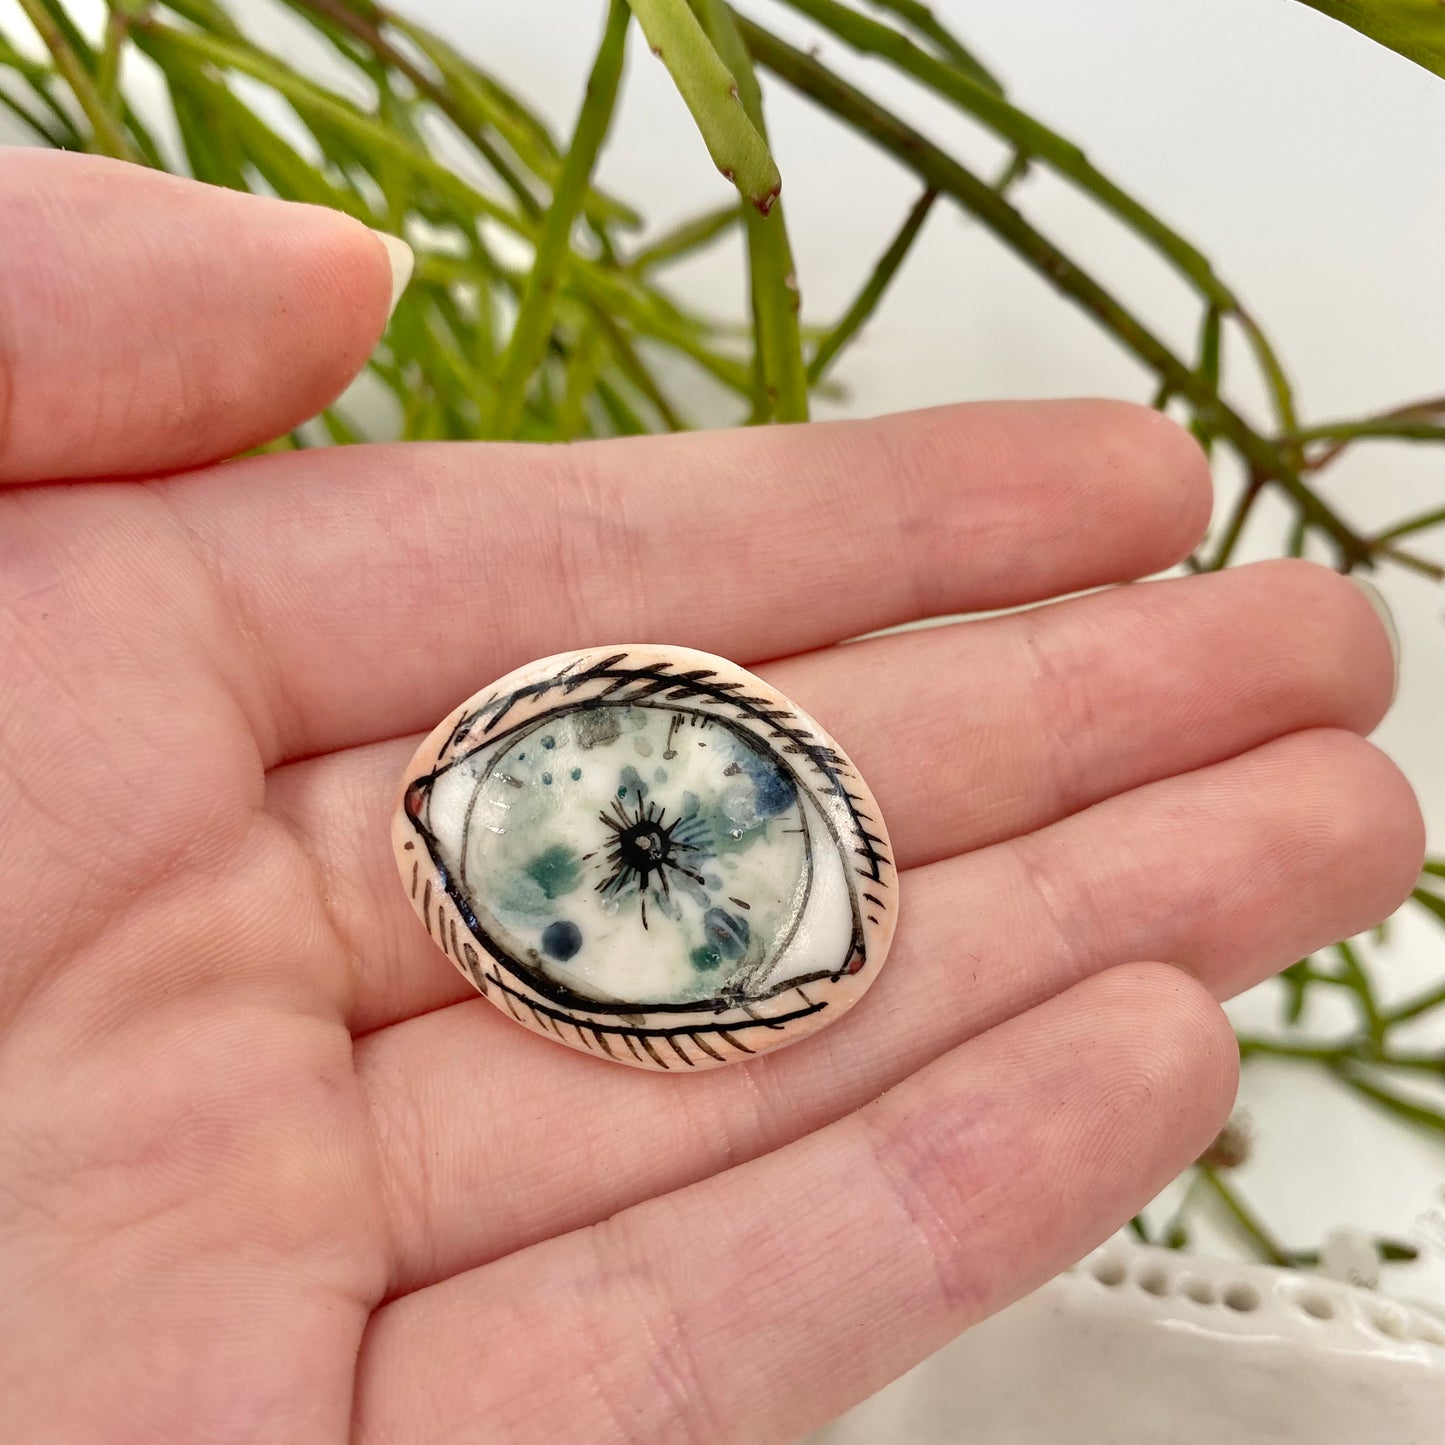 ‘The Protective Eye’ Hand Painted Porcelain Brooch